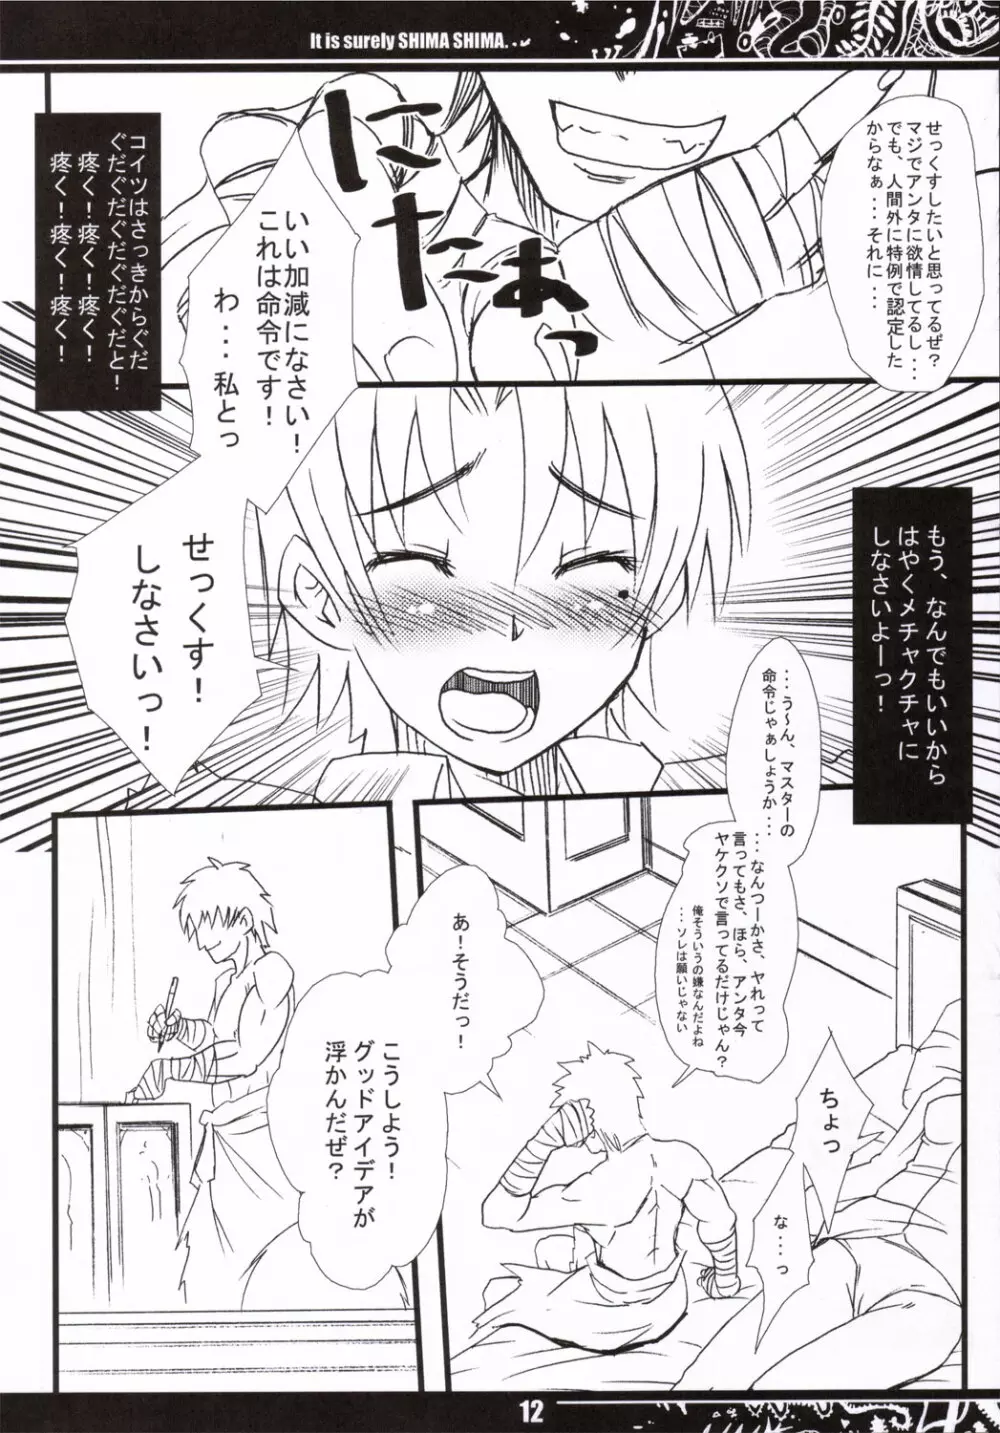 It is surely SHIMA SHIMA. Page.11